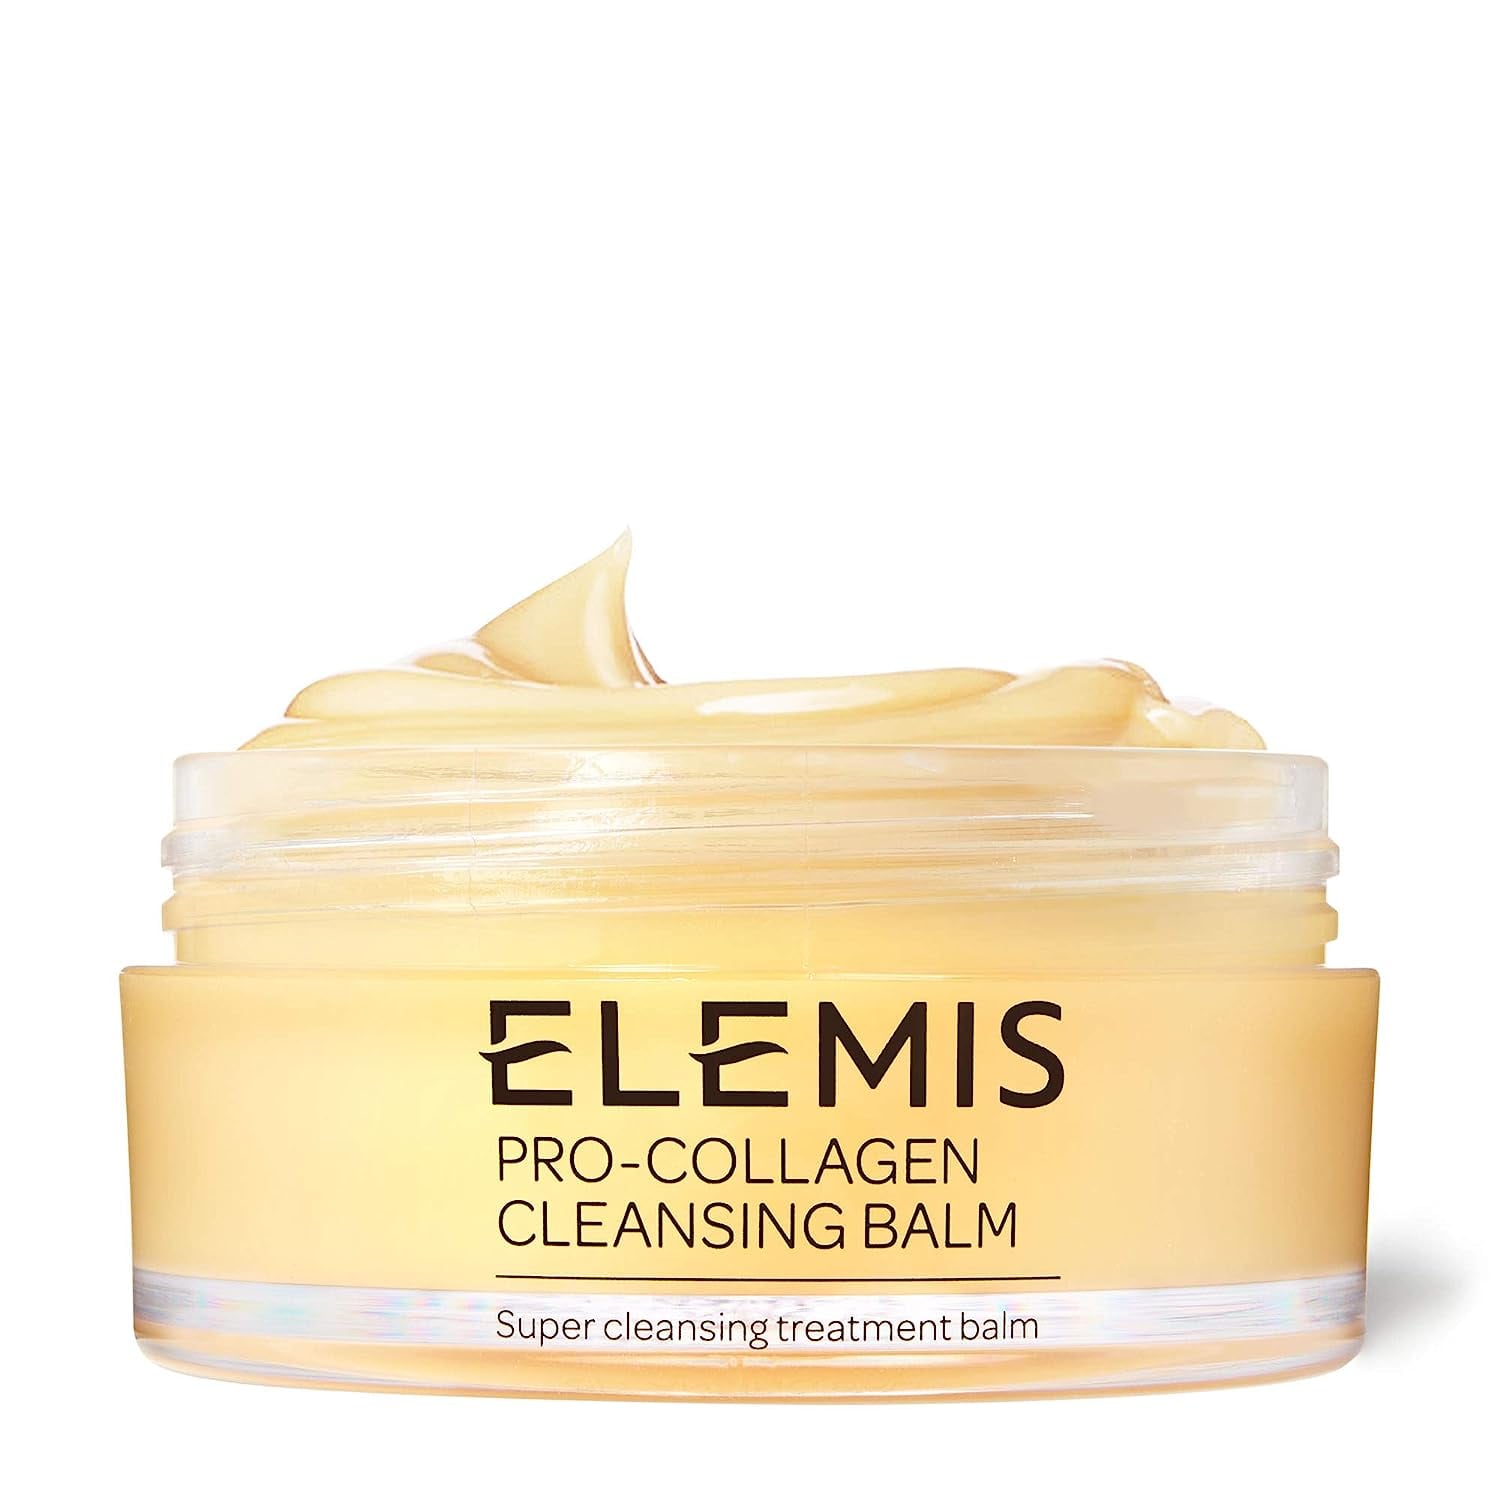 Best Prime Day Beauty Deal on Cleansing Balms